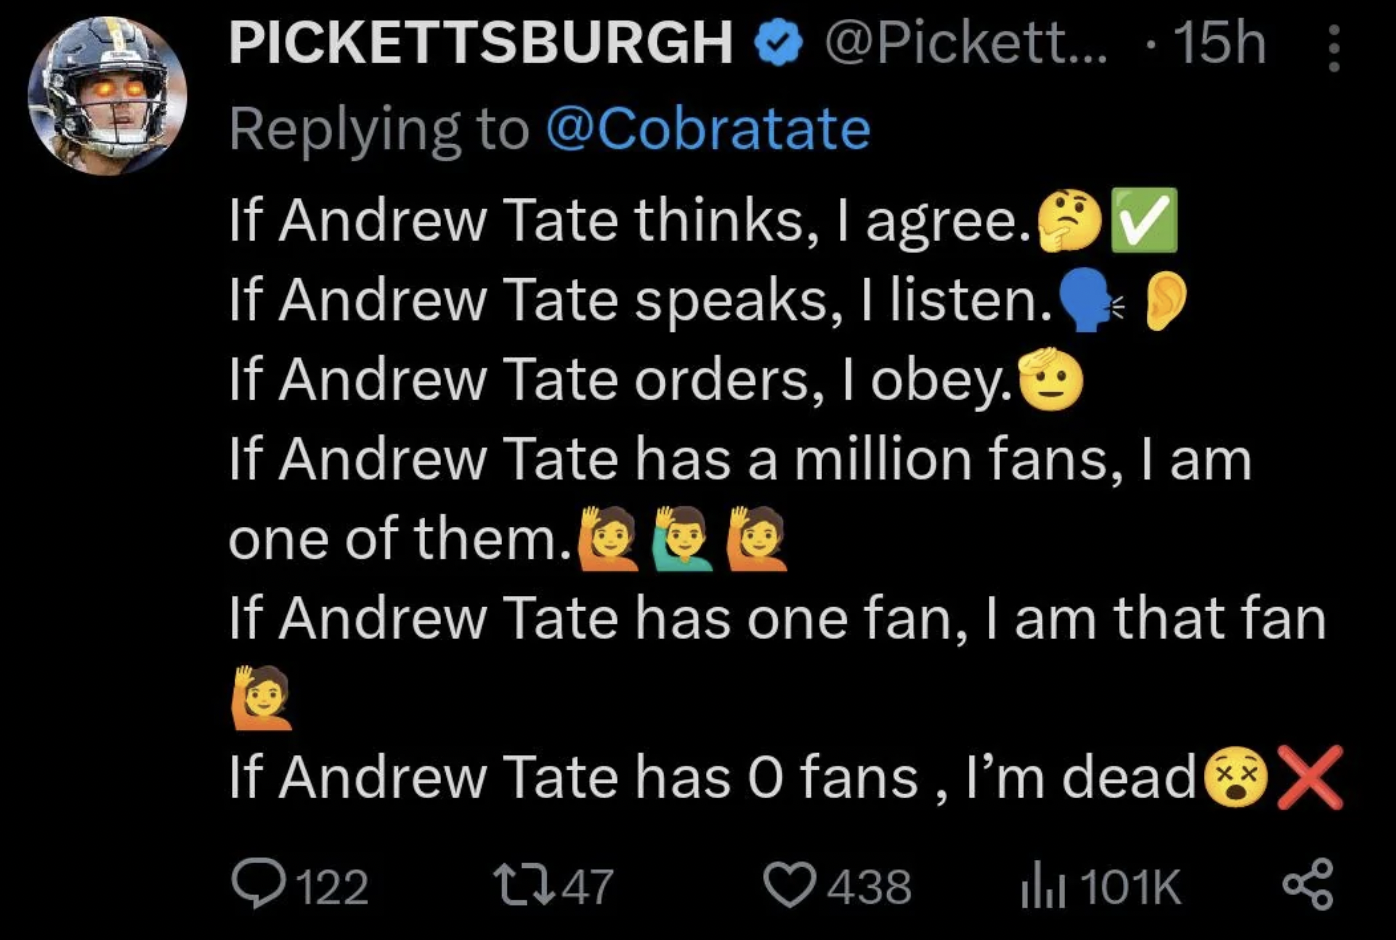 atmosphere - Pickettsburgh .... 15h If Andrew Tate thinks, I agree. If Andrew Tate speaks, I listen. If Andrew Tate orders, I obey. If Andrew Tate has a million fans, I am one of them.Oo If Andrew Tate has one fan, I am that fan If Andrew Tate has O fans,